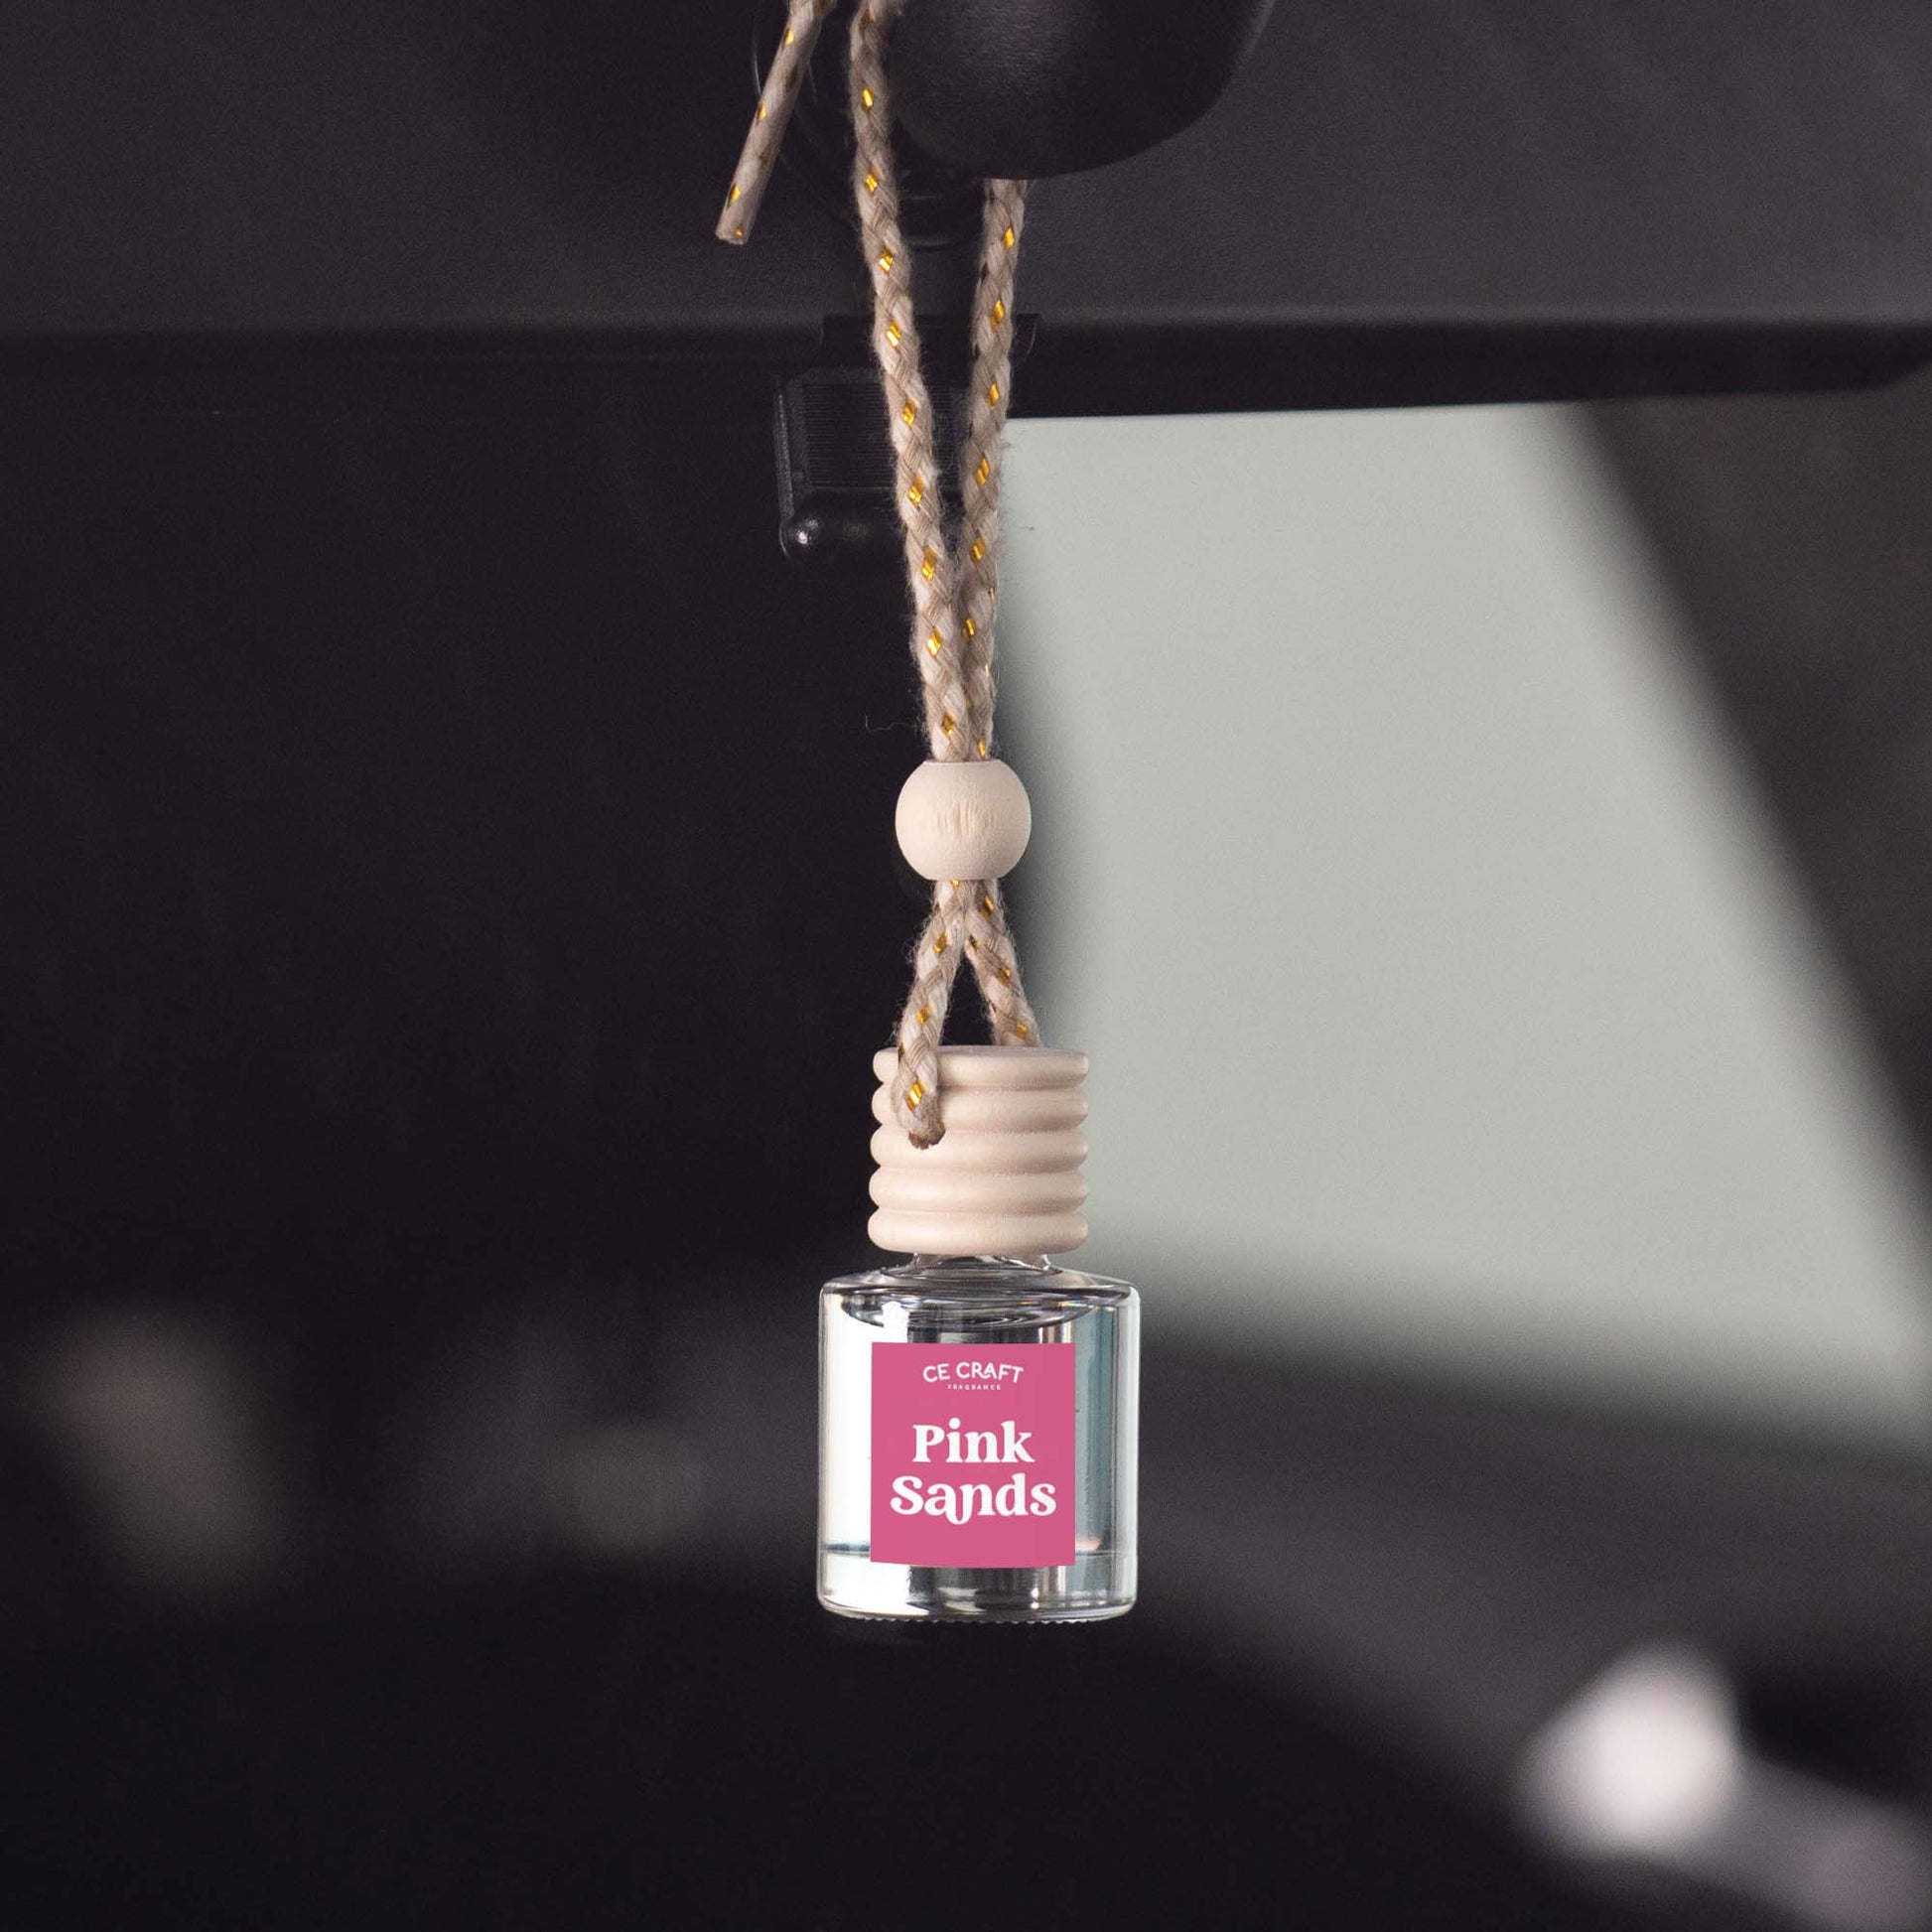 Pink Sands Scented Car Freshener Vehicle Air Fresheners CE Craft 